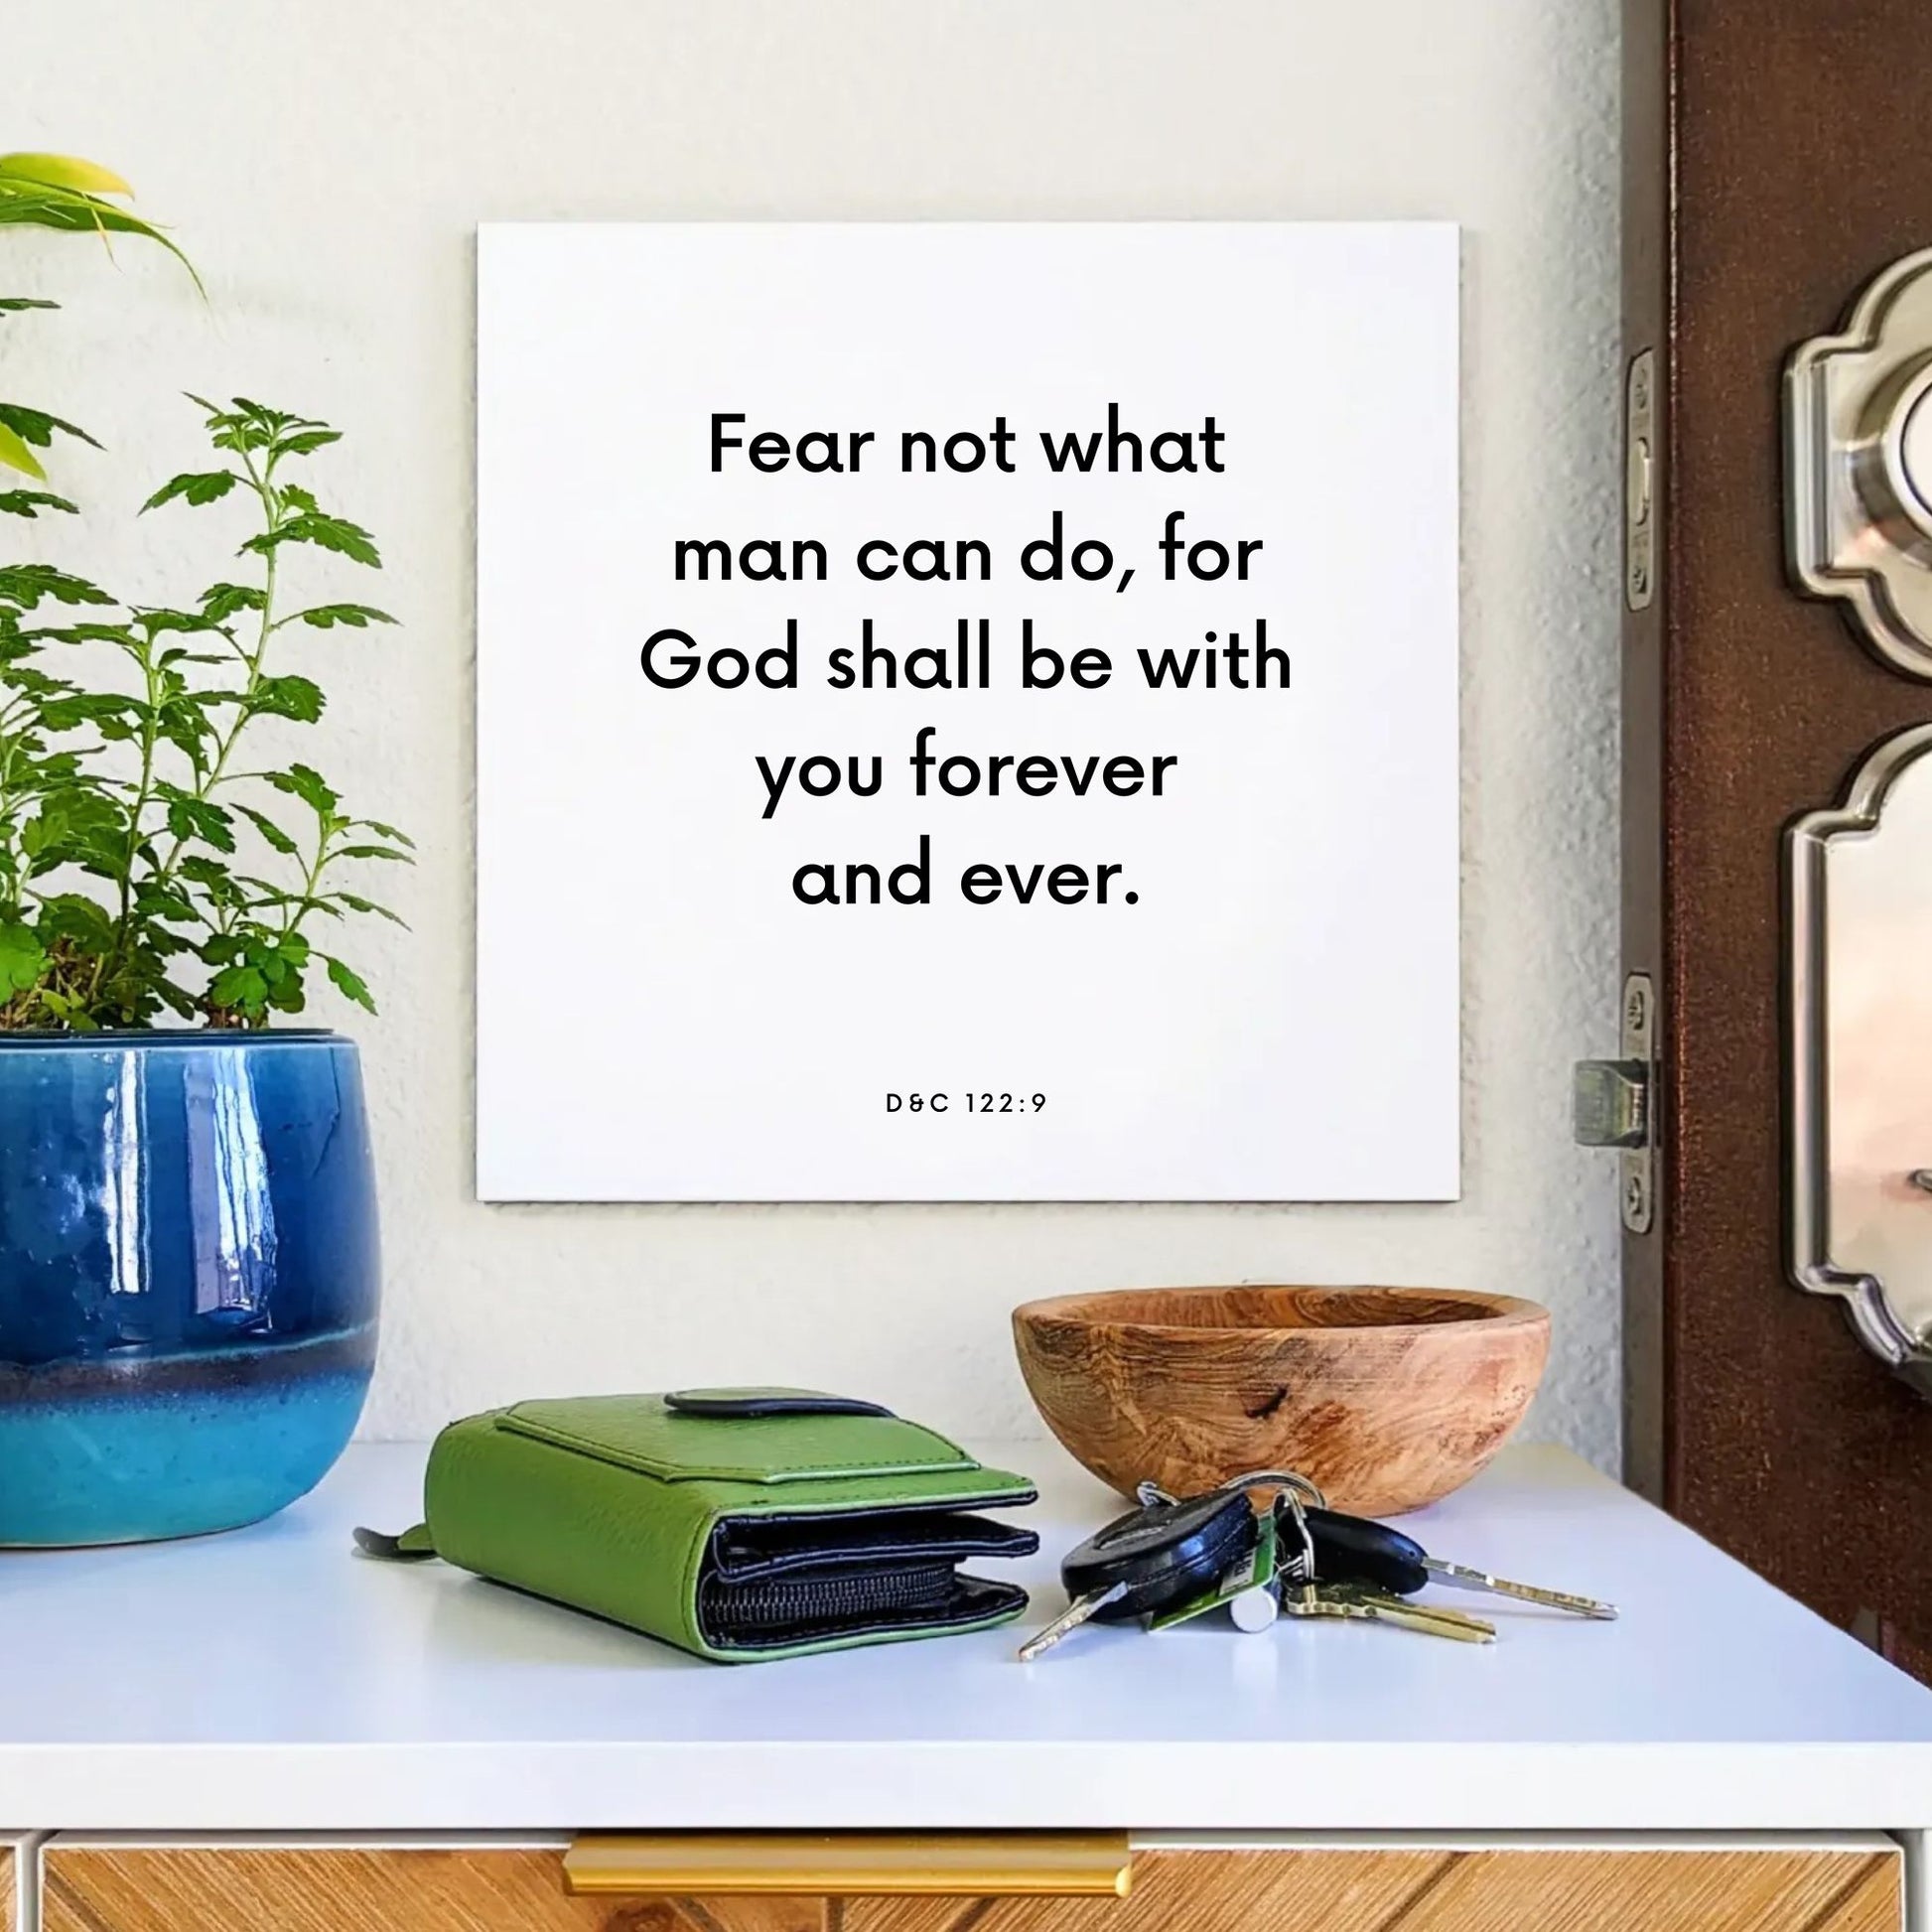 Entryway mouting of the scripture tile for D&C 122:9 - "Fear not what man can do"